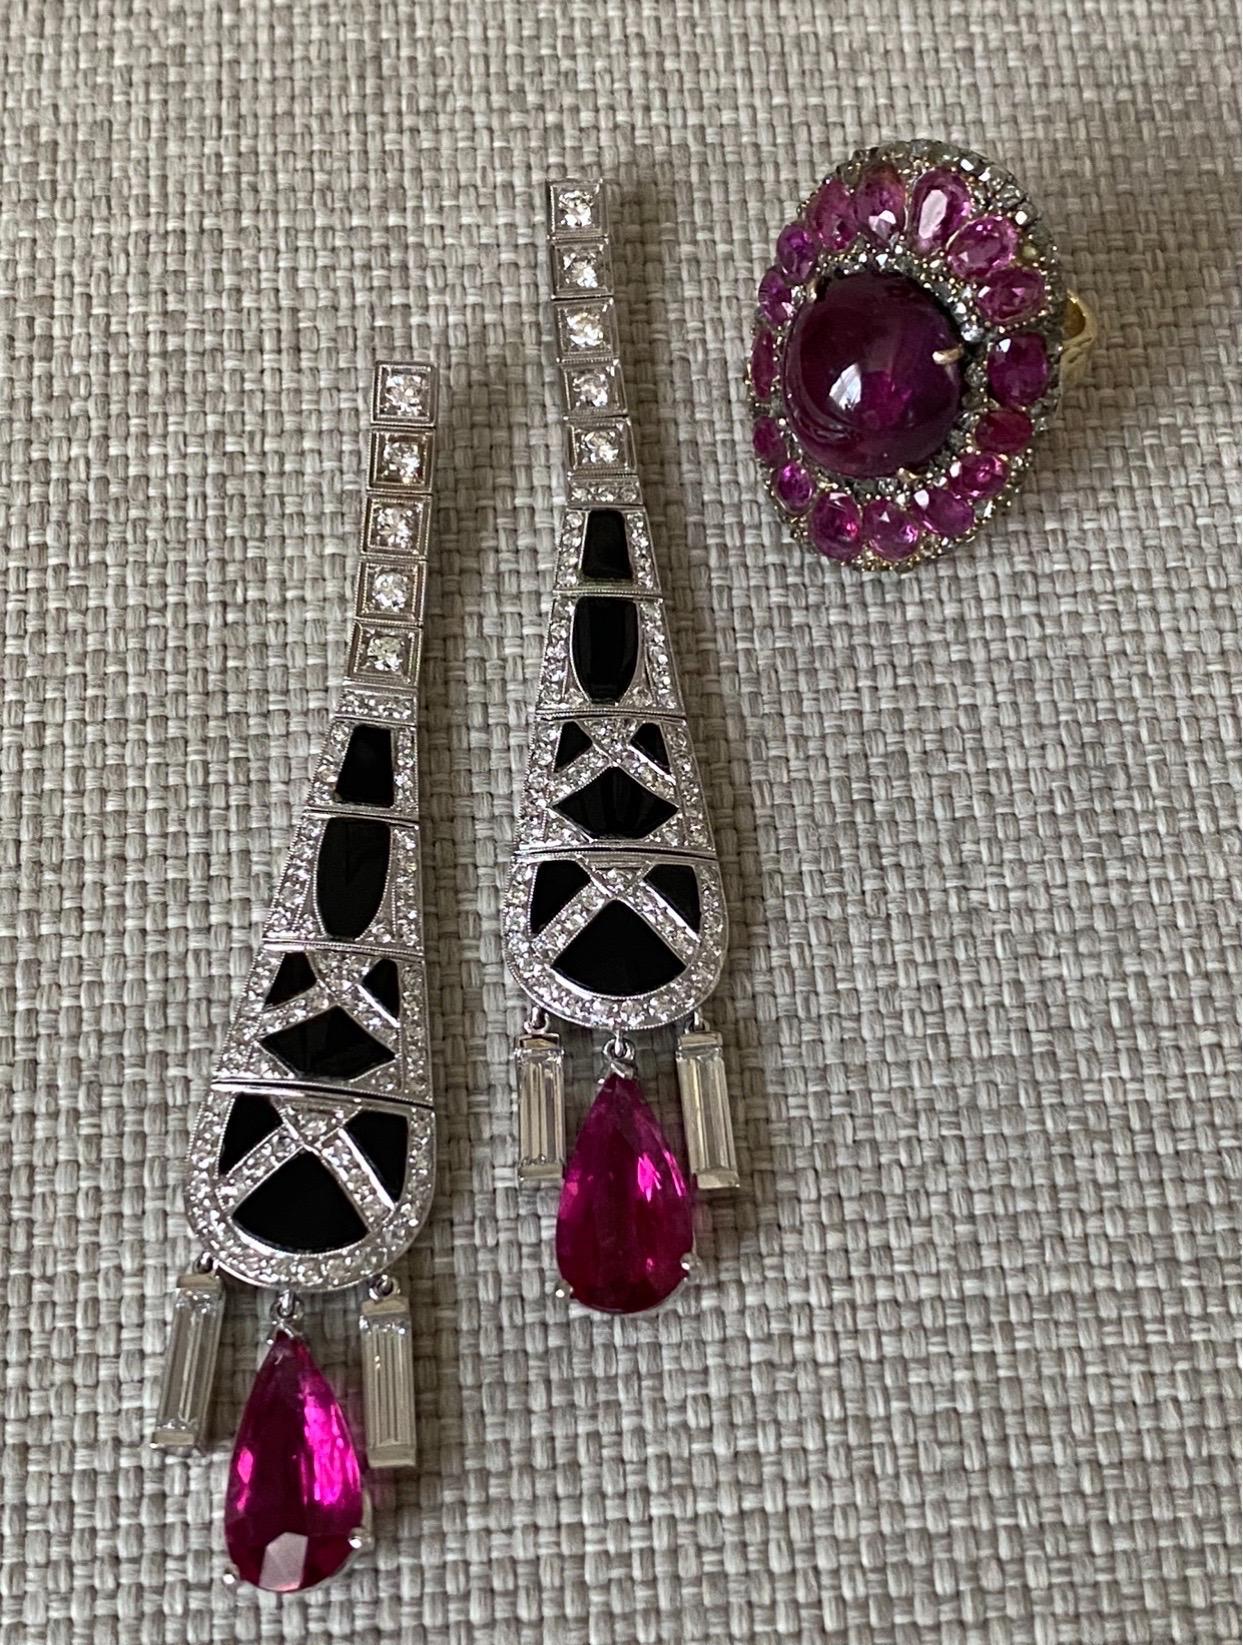 Incredible Diamond Onyx Rubellite 18k Gold Geometric Chandelier Earrings In Excellent Condition For Sale In New York, NY